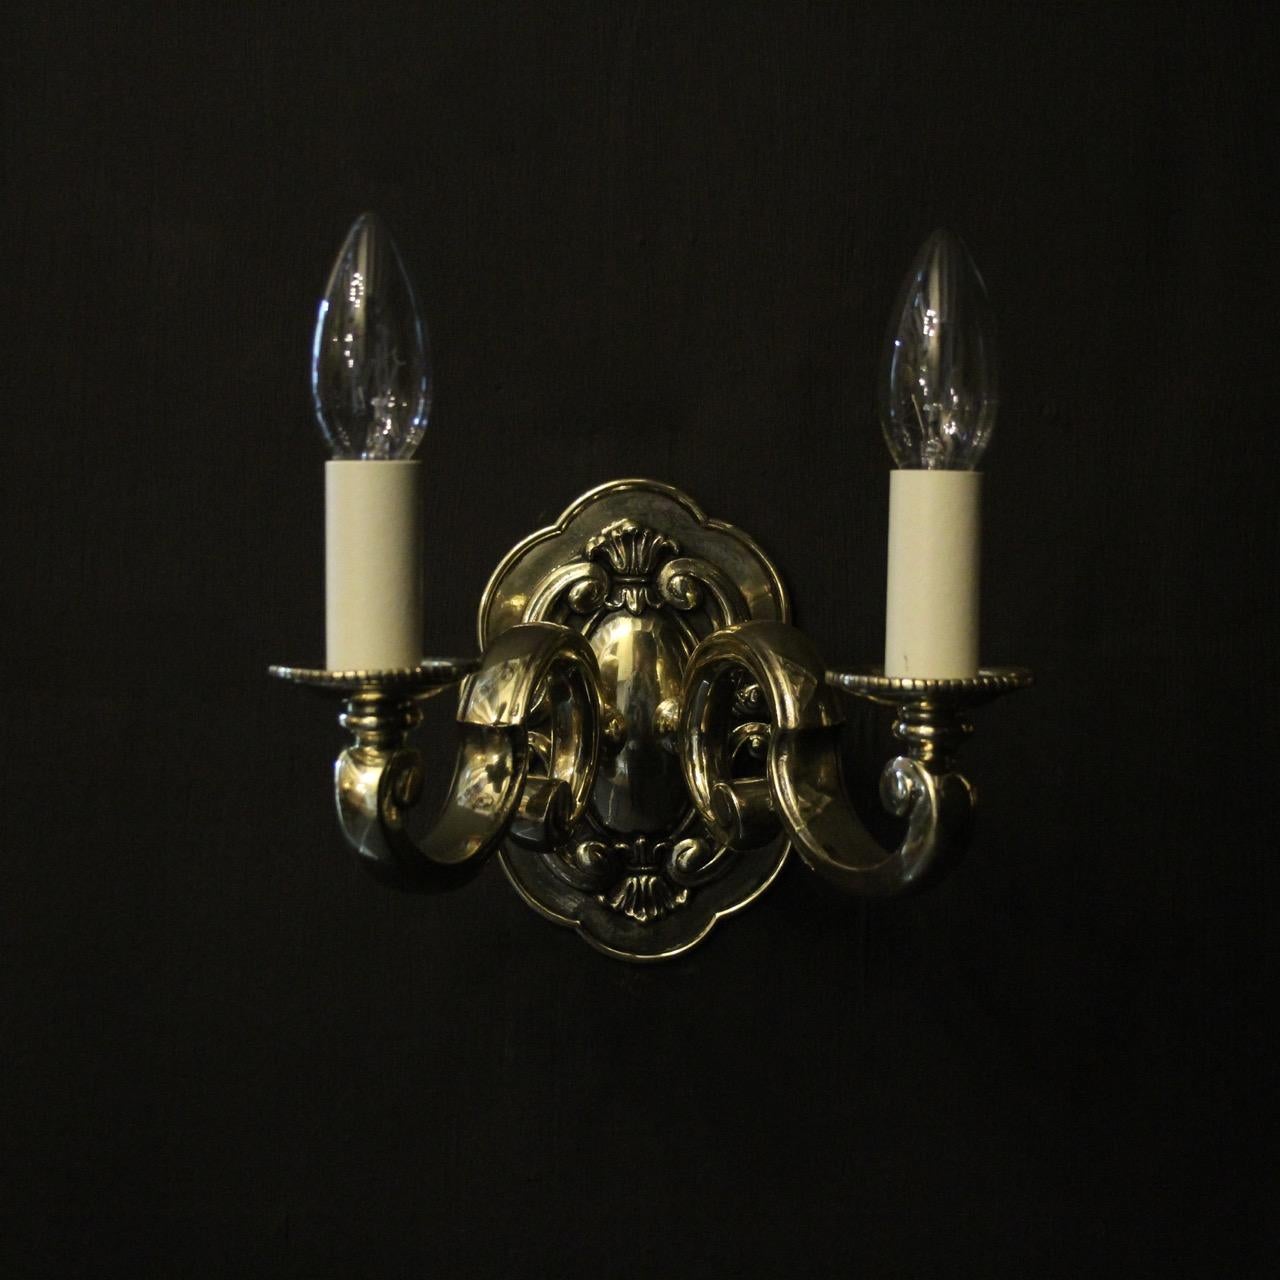 An English pair of repolished cast brass twin arm antique wall lights, the large gauge scrolling arms with circular bobeche drip pans, issuing from an ornate floral edged backplate, sympathecially repolished and great proportions. Fully rewired and